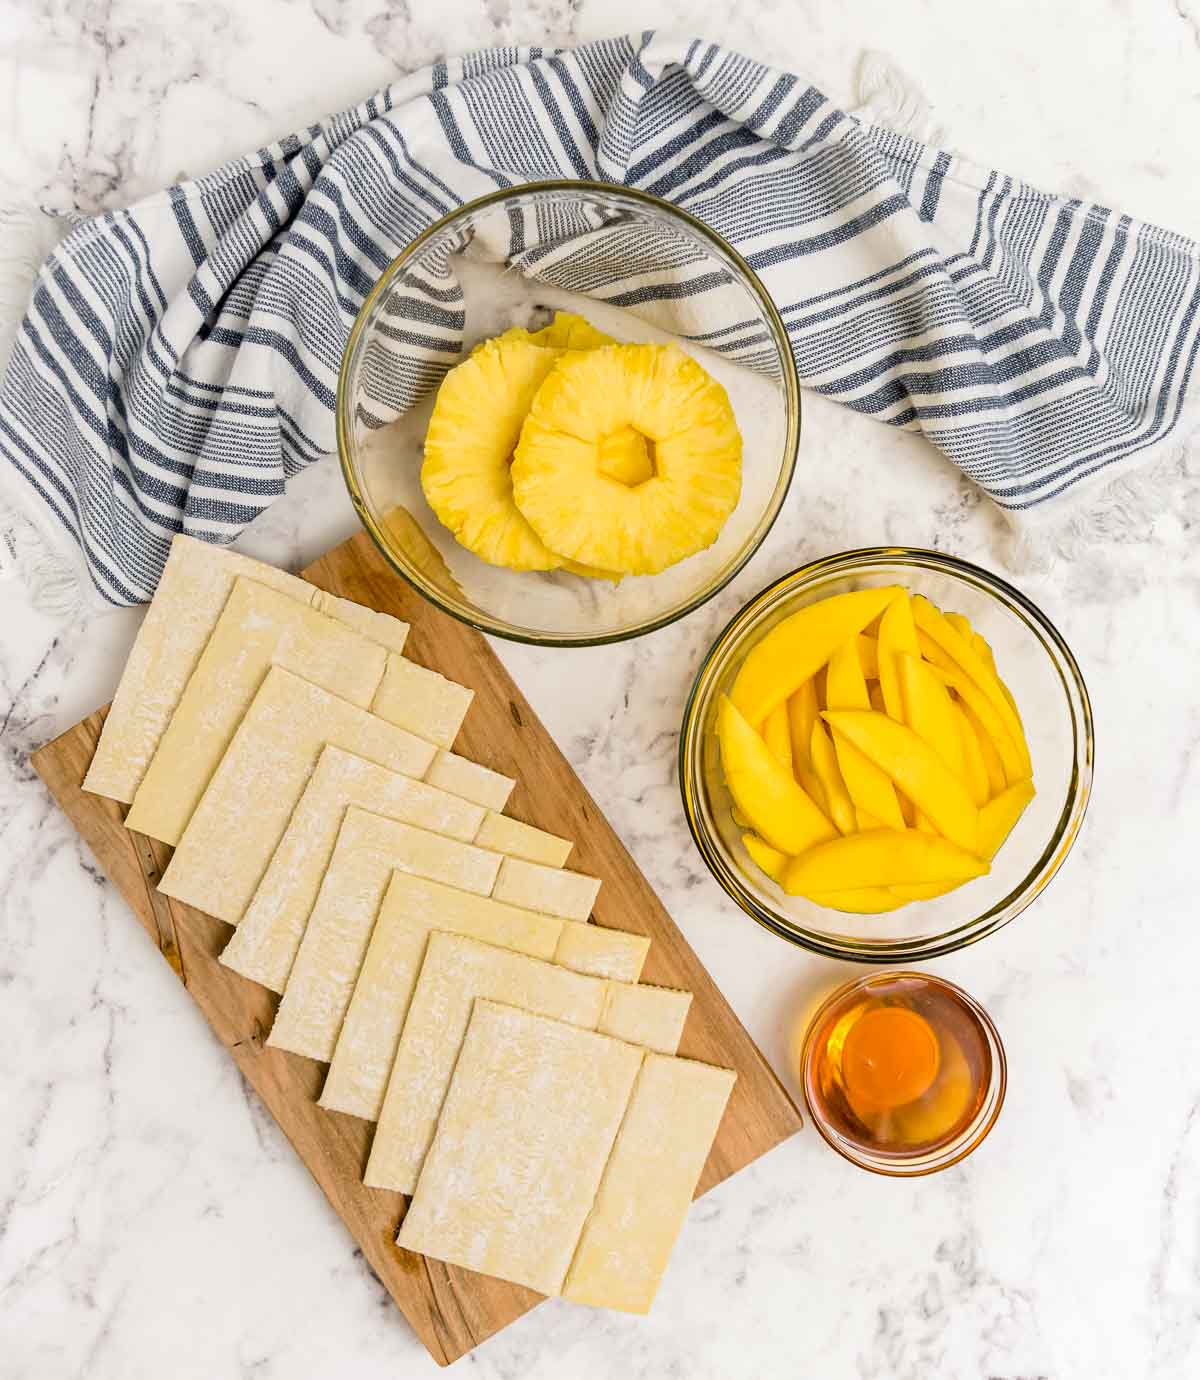 Ingredients to make pineapple and mango puff pastry squares